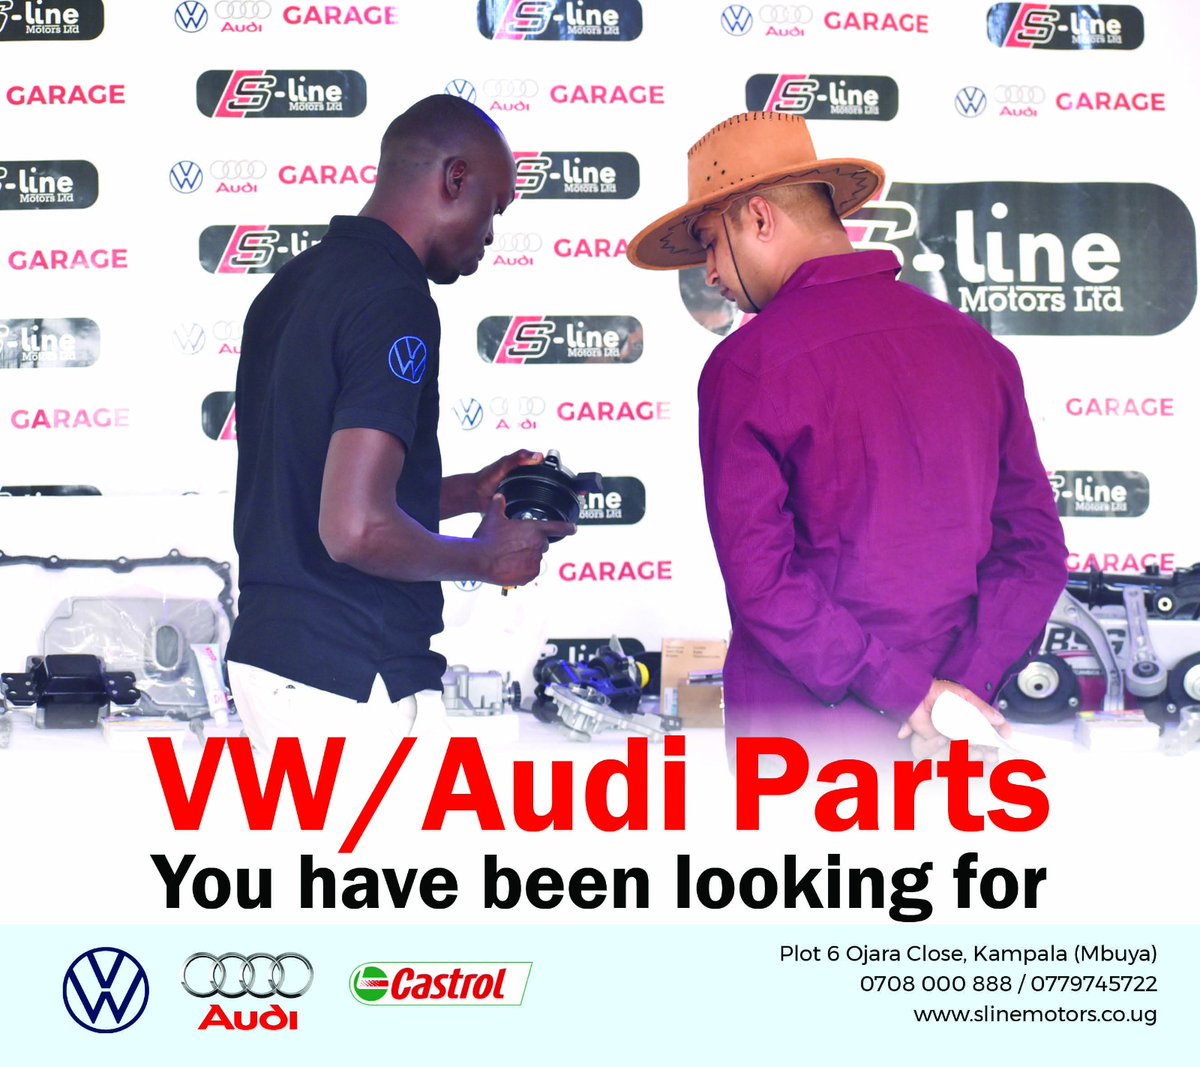 What's that VW or Audi spare part that you have failed to find? Call 0708000888/779745722 today. 
Your spare part is just a call away!
We fix it right the very first time.
#VolkswagenKampala
#AudiKampala
#VWGarage
#AudiGarage